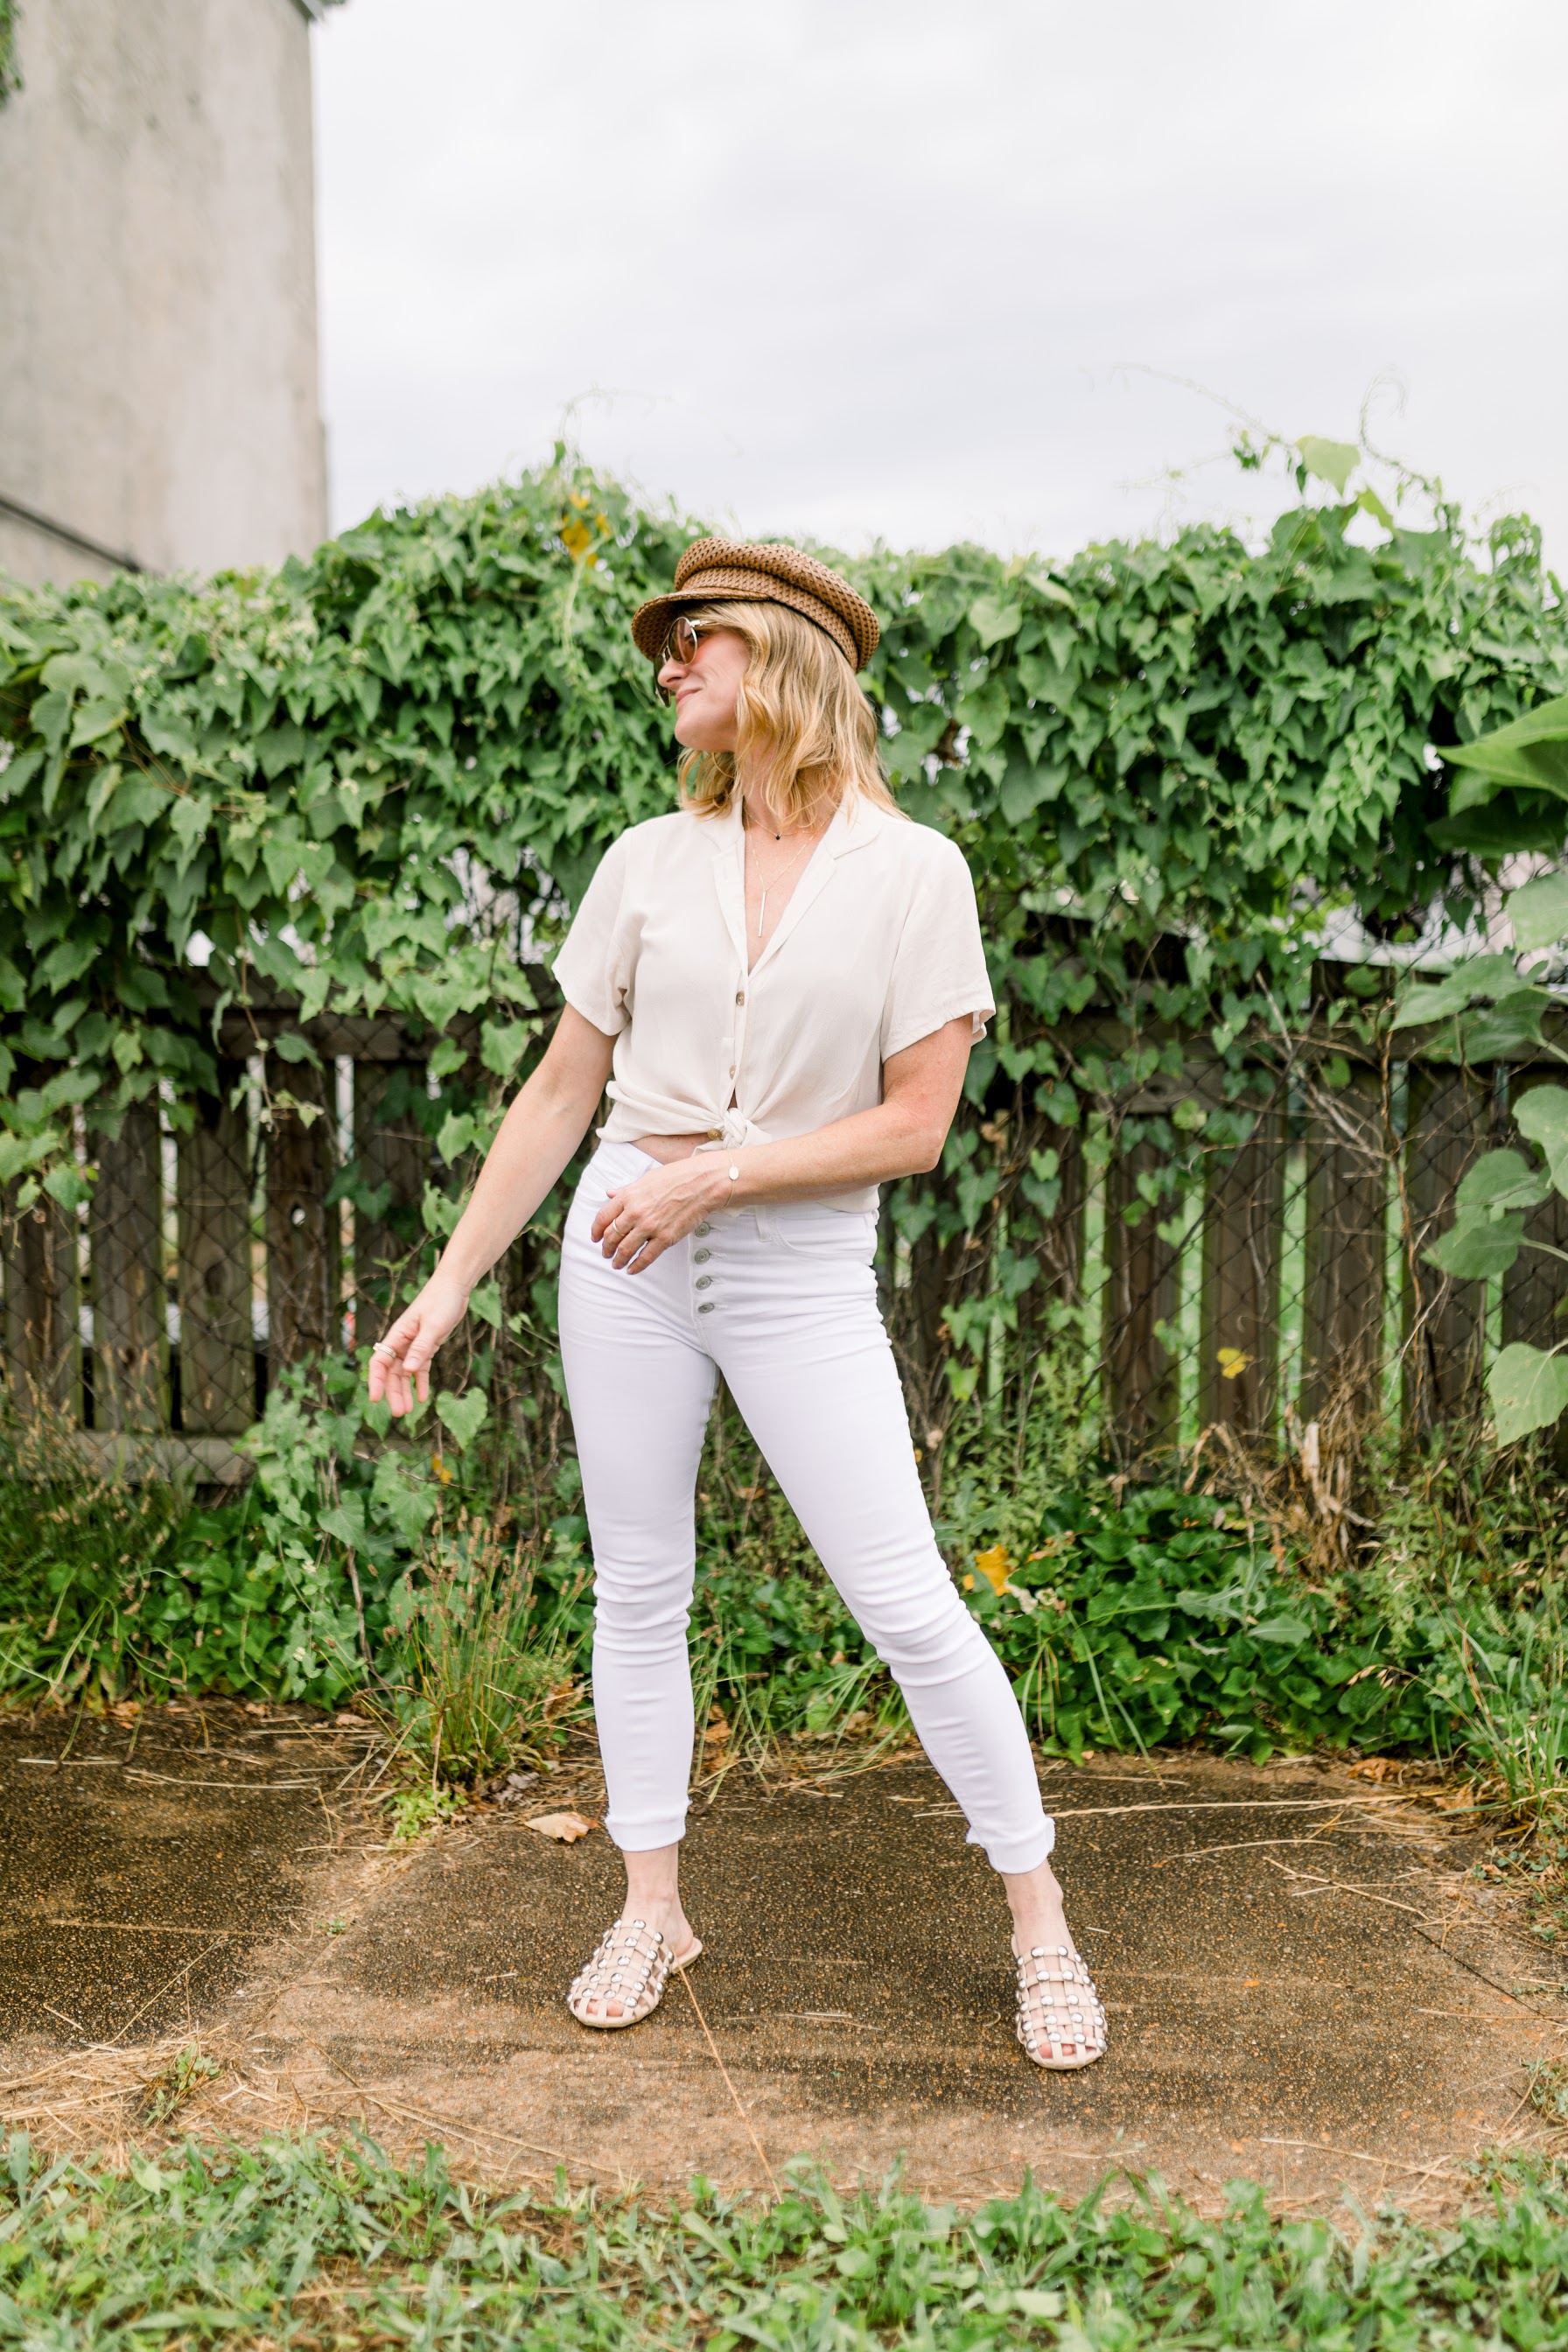 How to Wear White Jeans 3 Ways | how to wear white jeans | how to wear white jeans summer | white jeans outfit | white jeans outfit summer | button up shirt outfit | button up shirt outfit summer | button up shirt outfit casual | mules shoe outfit | mules shoe outfit summer | Oh Darling Blog